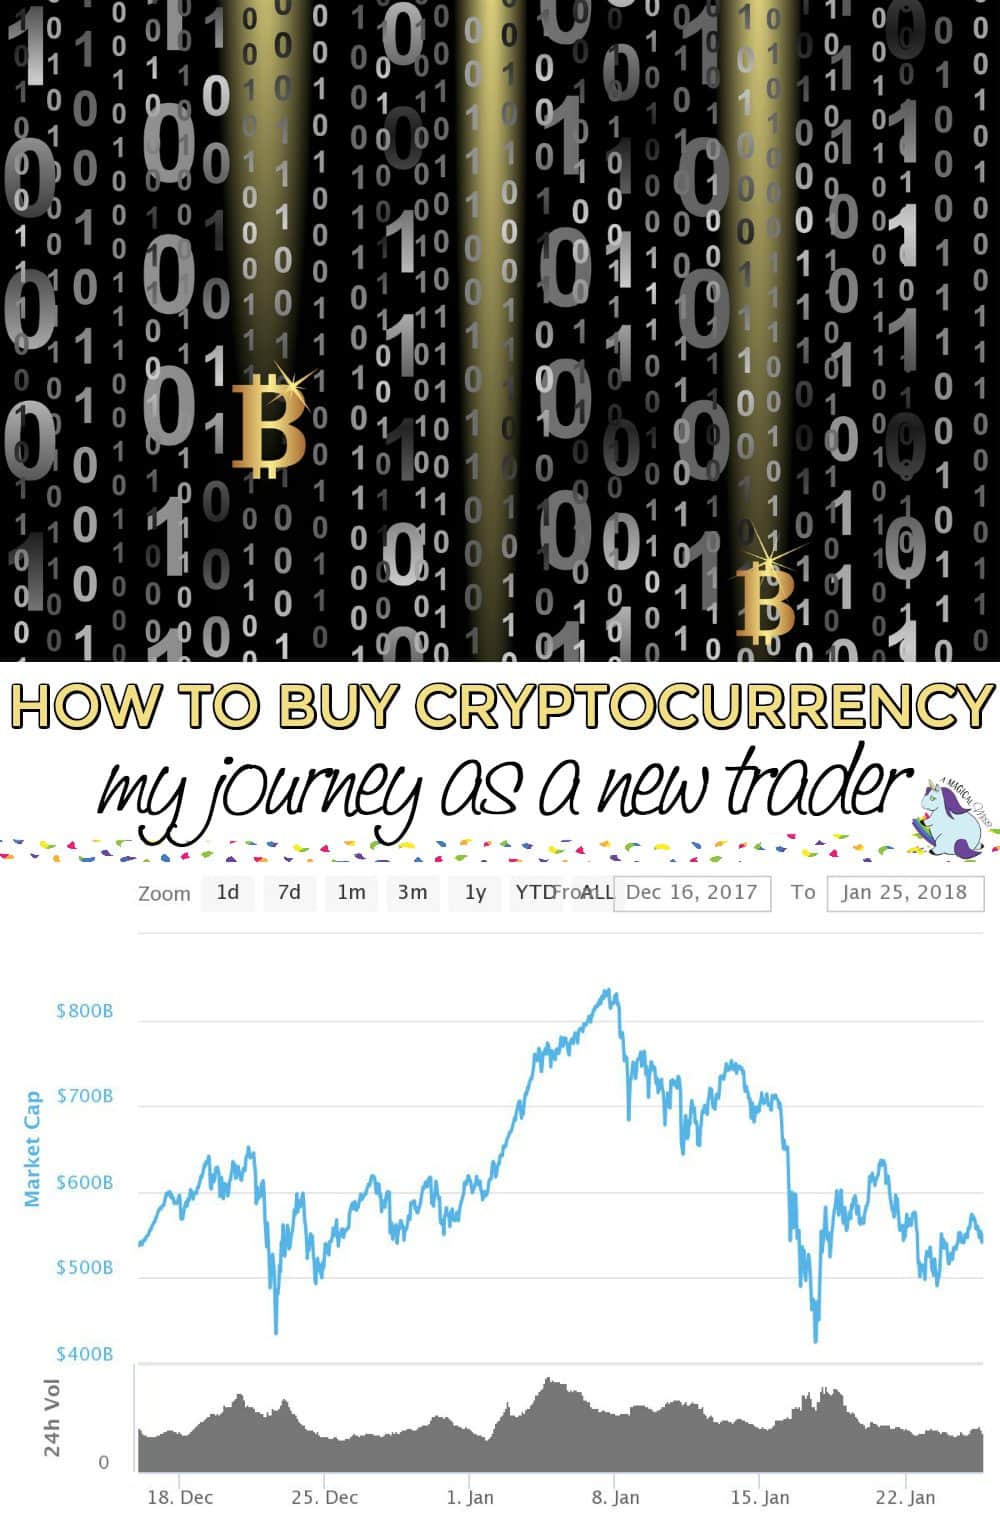 How to Buy Cryptocurrency and My Journey as a New Crypto Trader